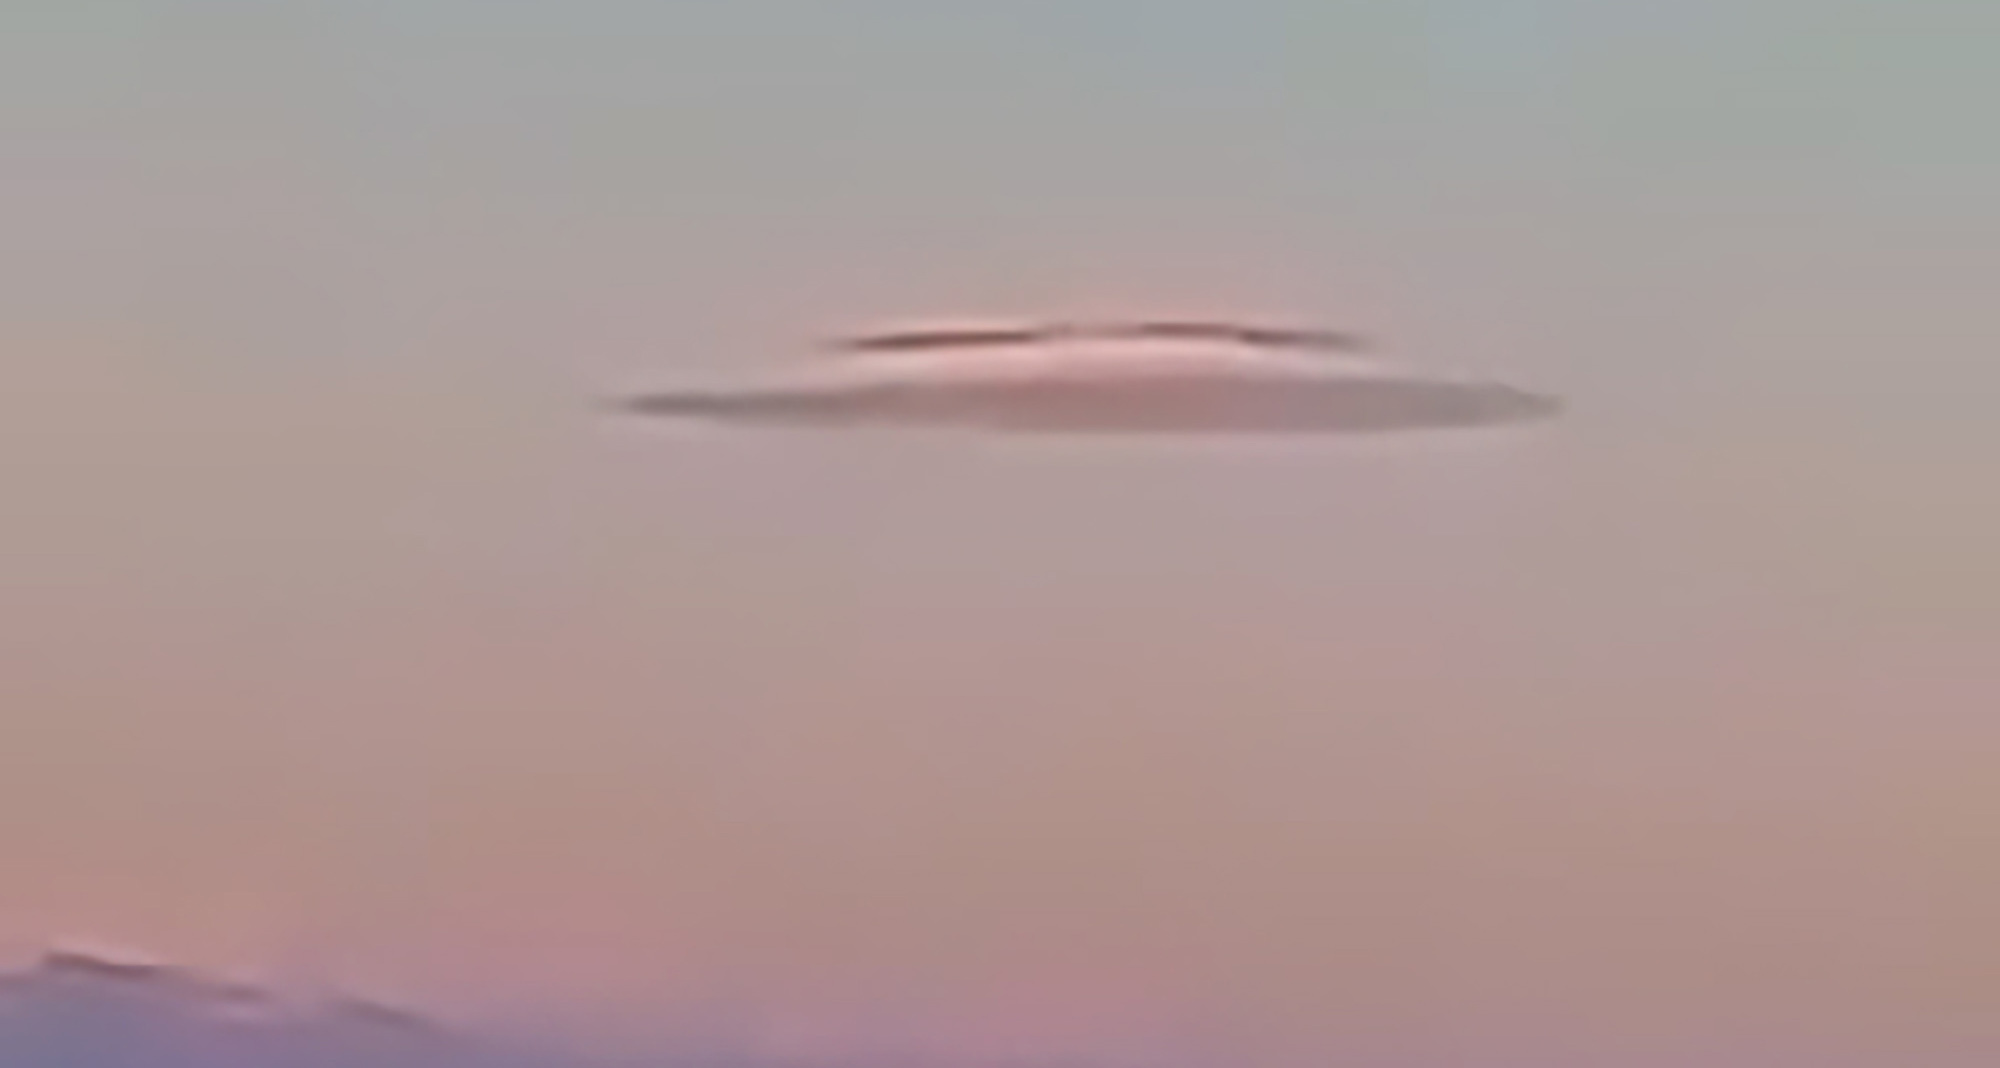 Read more about the article Debate Over Mysterious Cloud-Shaped UFO